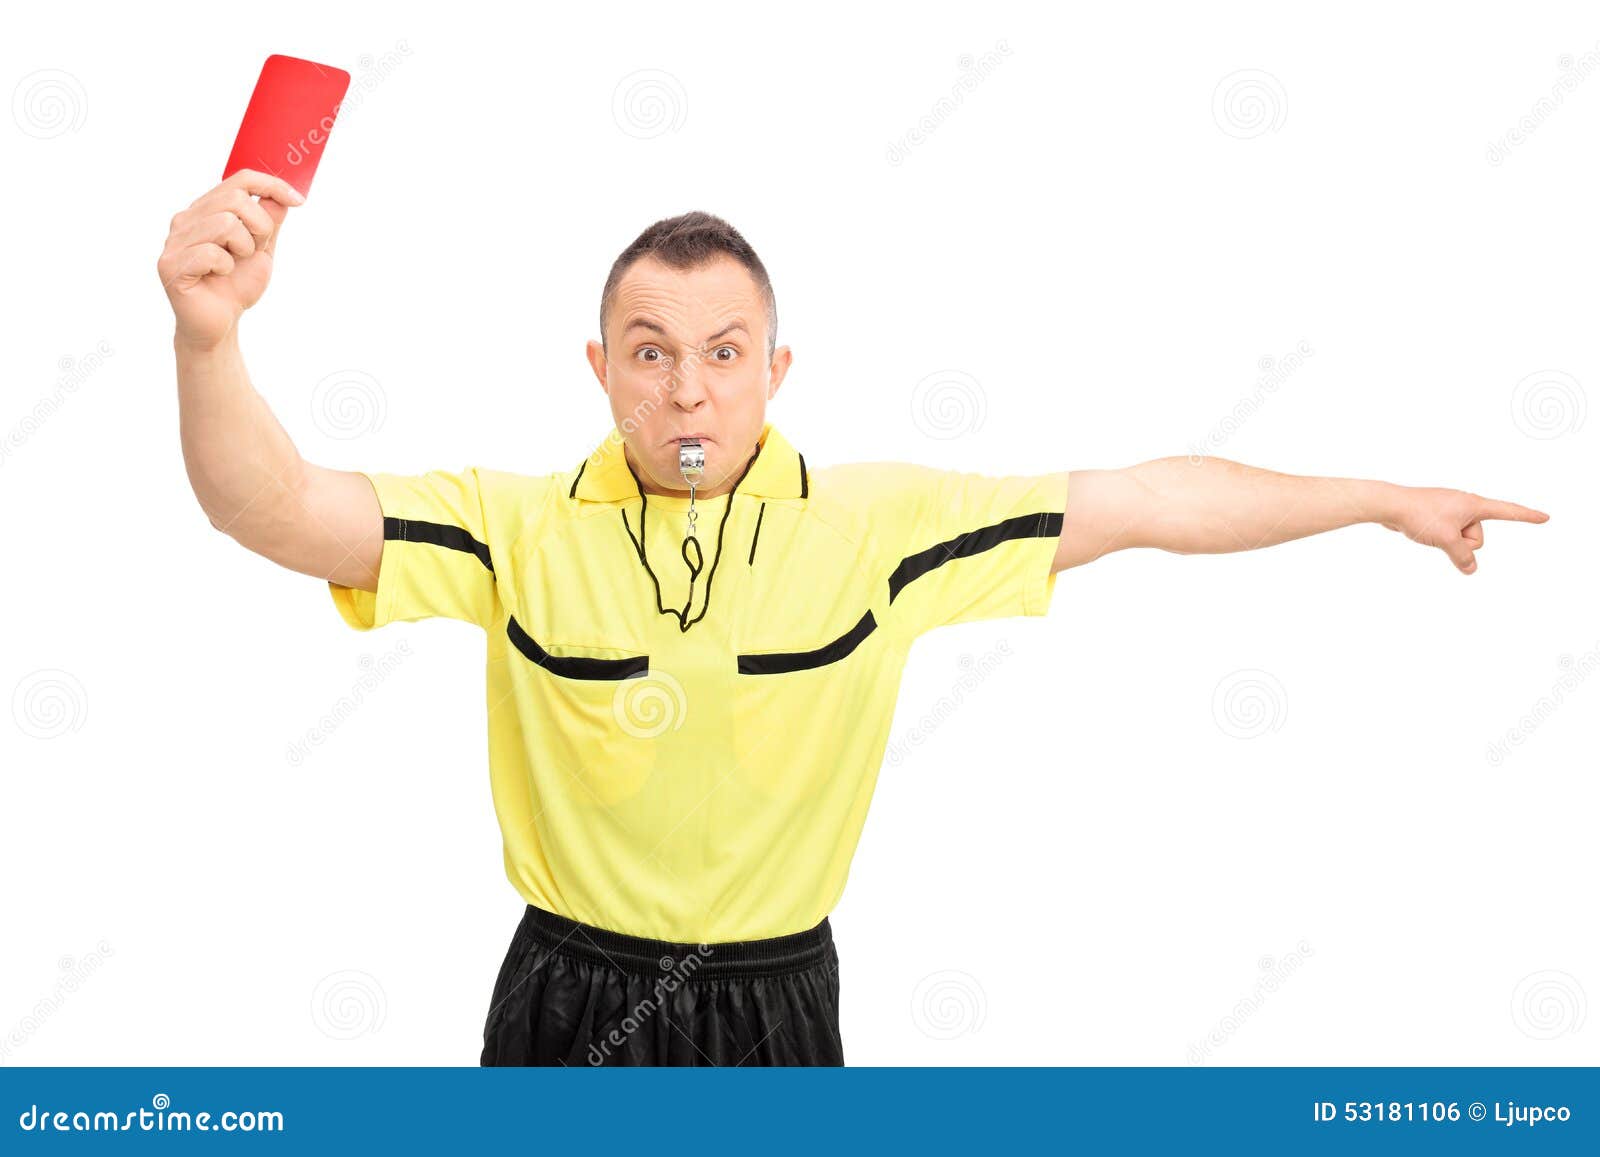 angry-football-referee-showing-red-card-yellow-jersey-pointing-his-hand-isolated-white-background-53181106.jpg